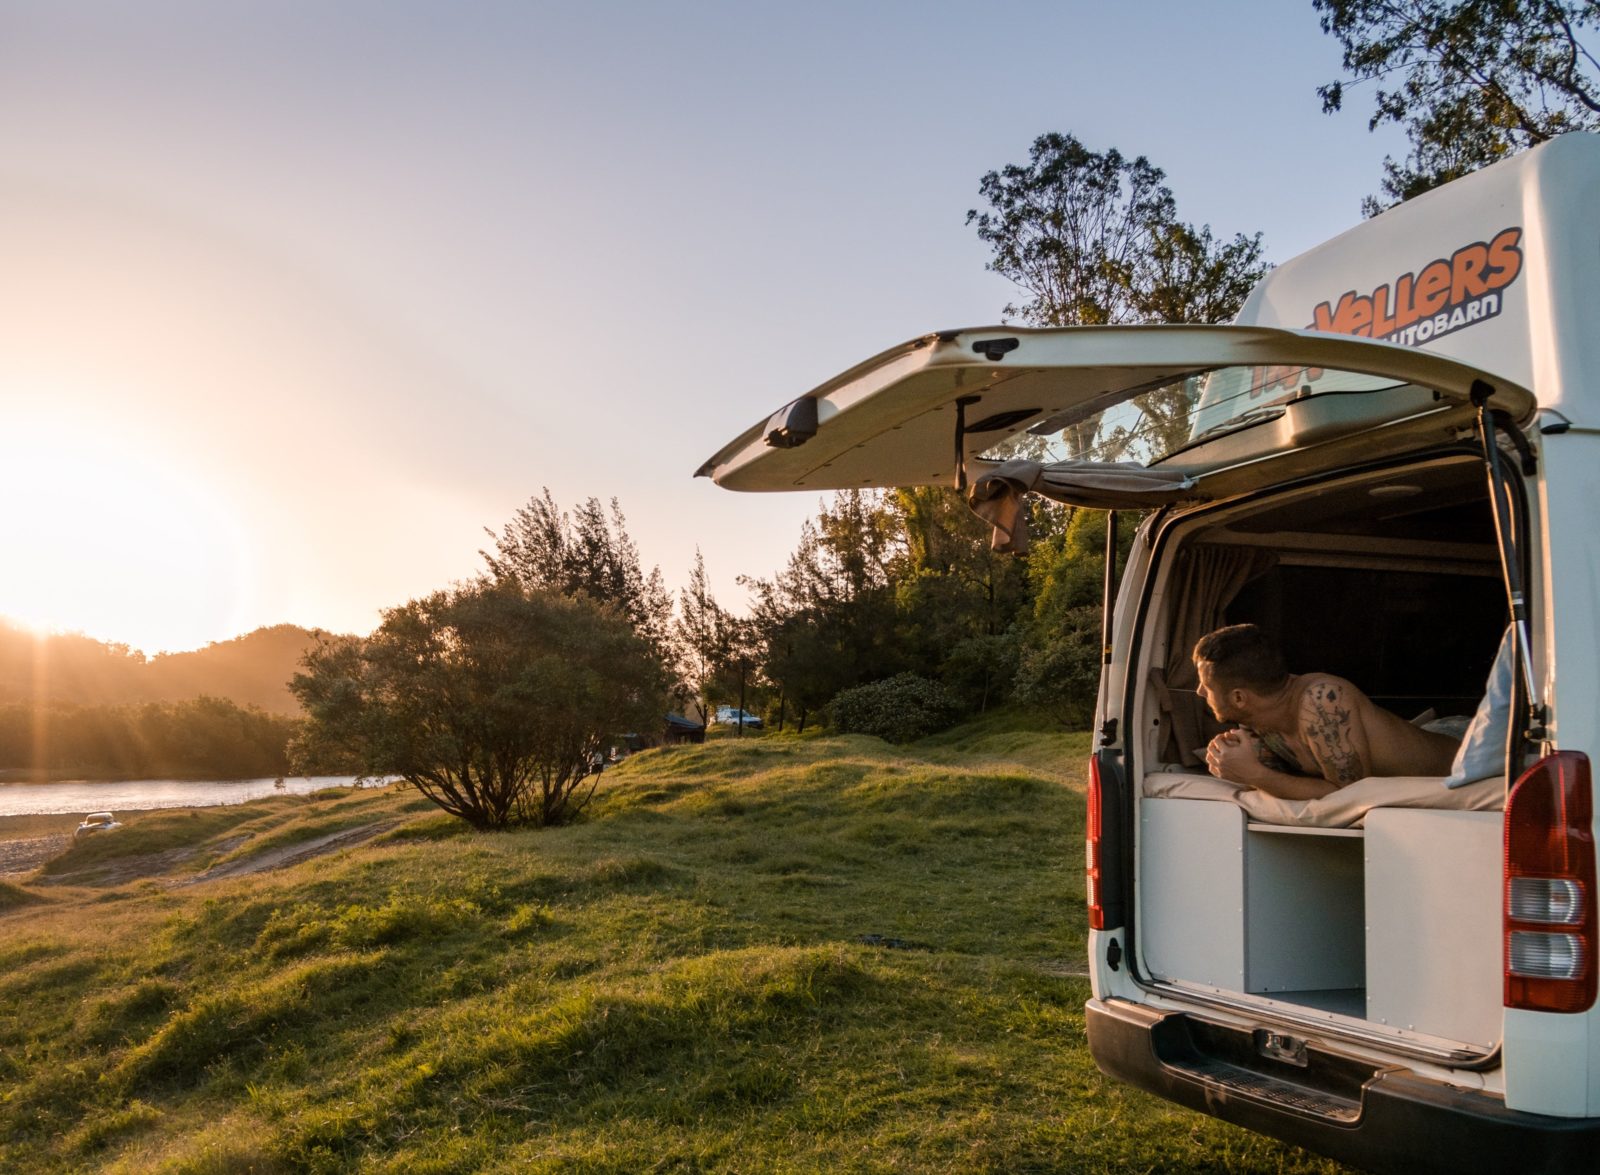 Experience the real Australia during your own self-drive holiday with a campervan!